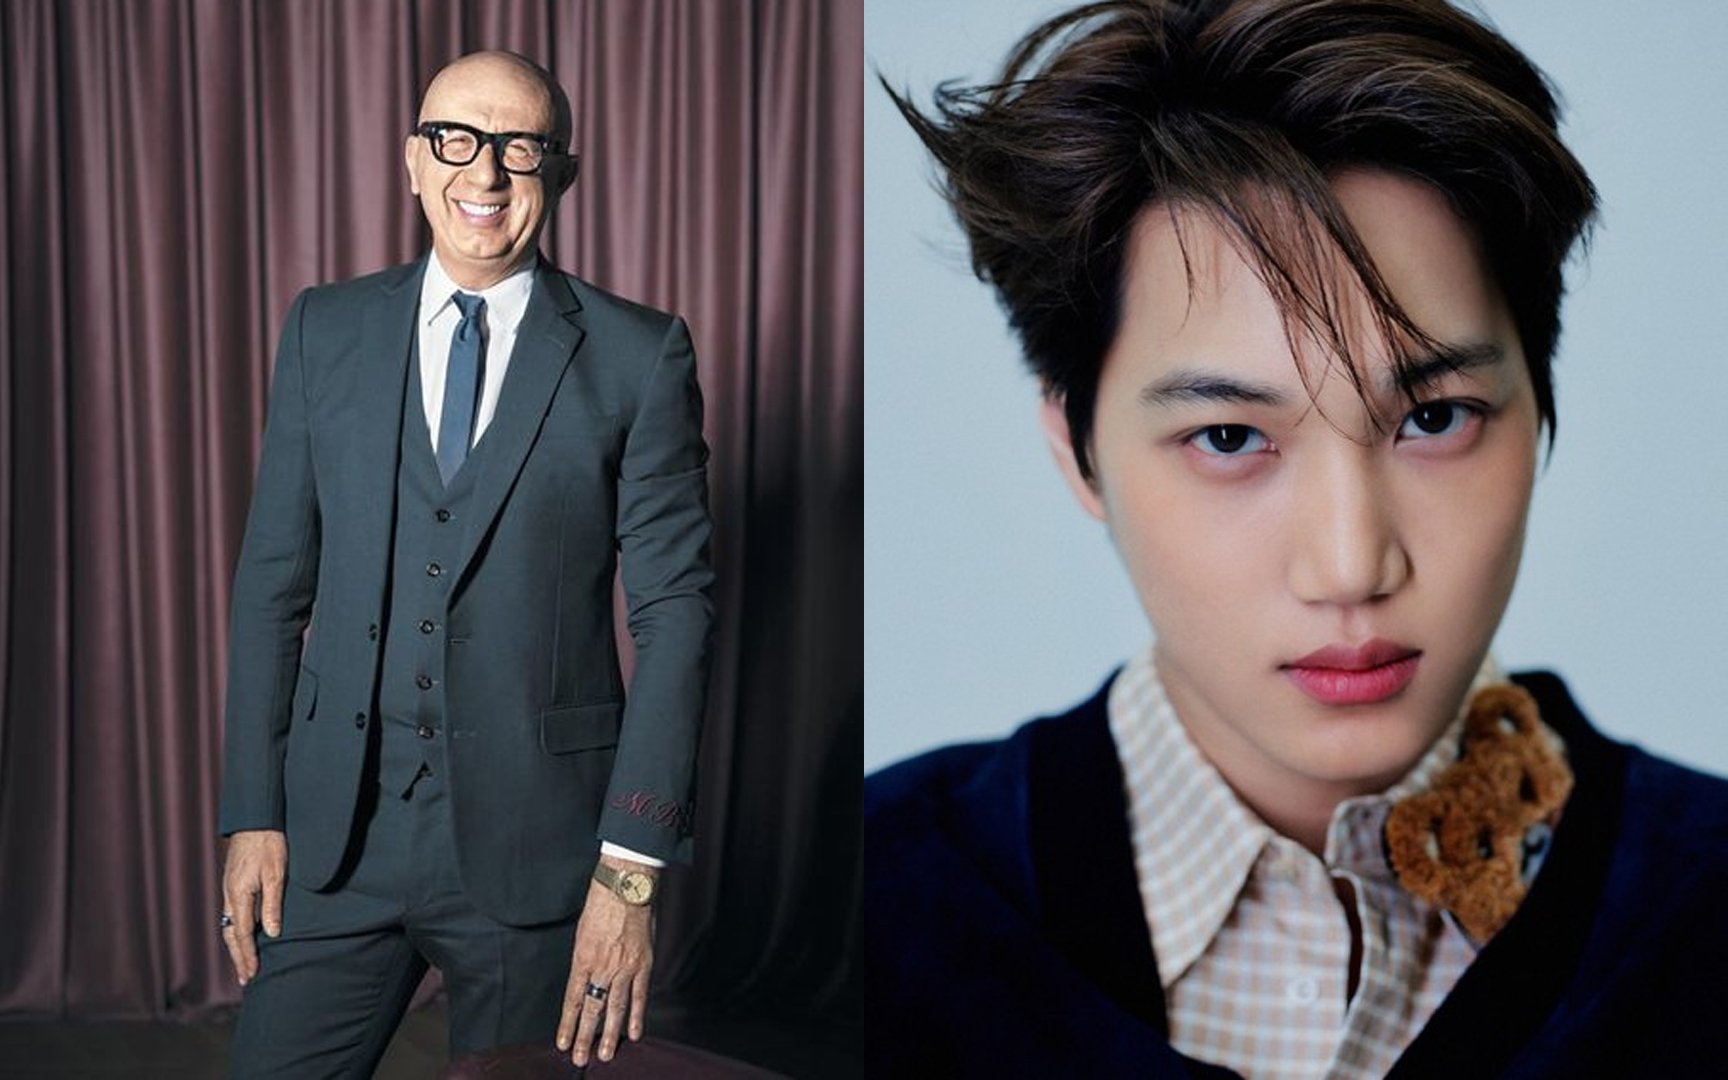 udredning aktivitet Rendezvous Marco Bizzarri, the president and CEO of Gucci, talks about his fondness of  EXO's Kai | allkpop